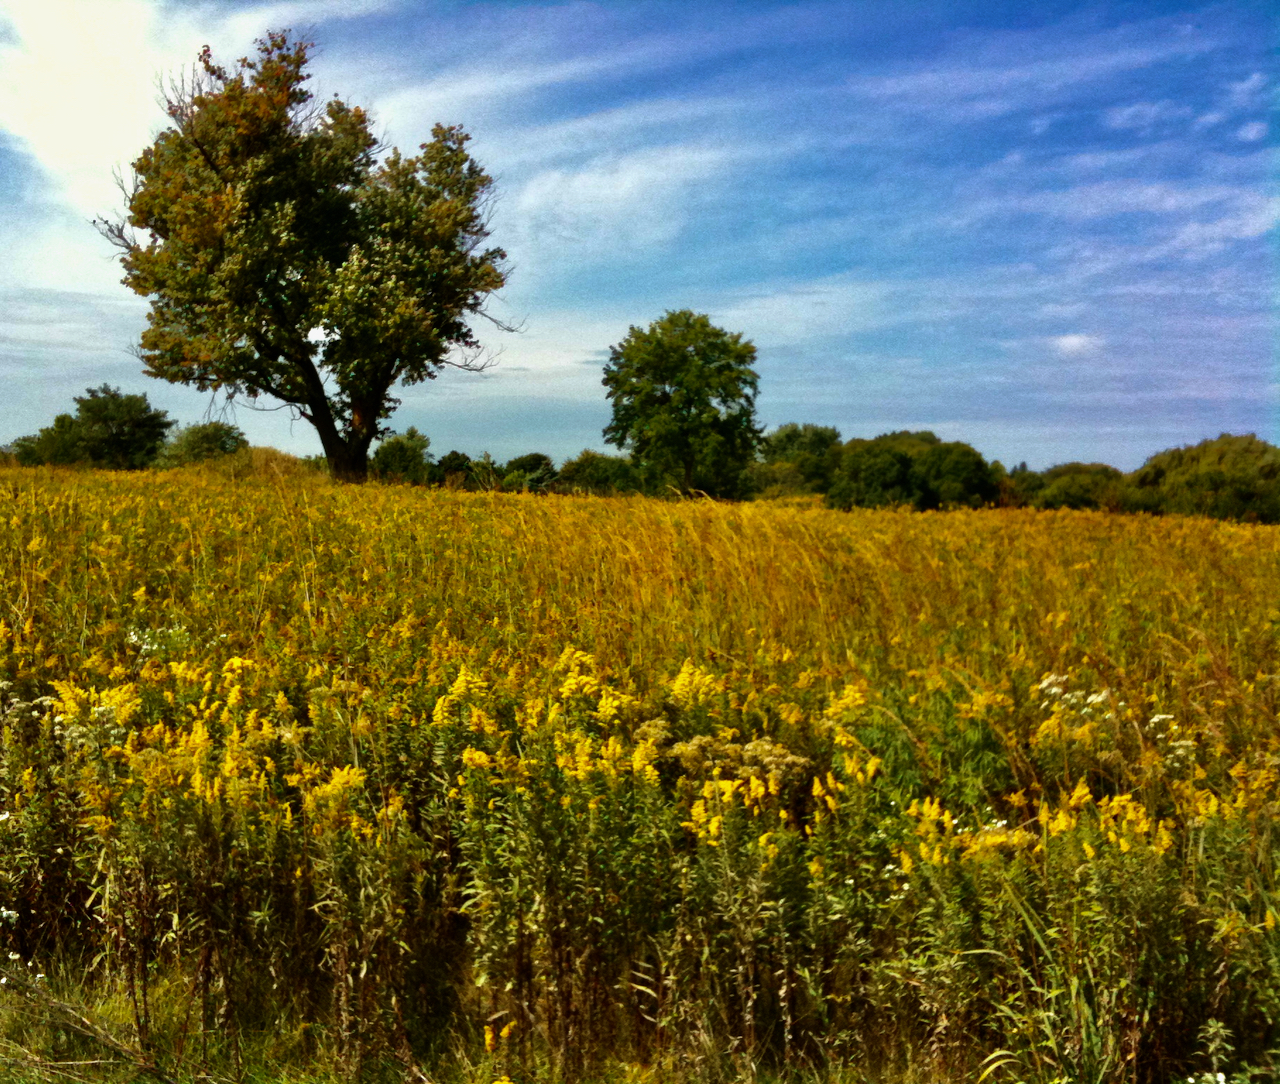 A prairie picture with gold flowers.